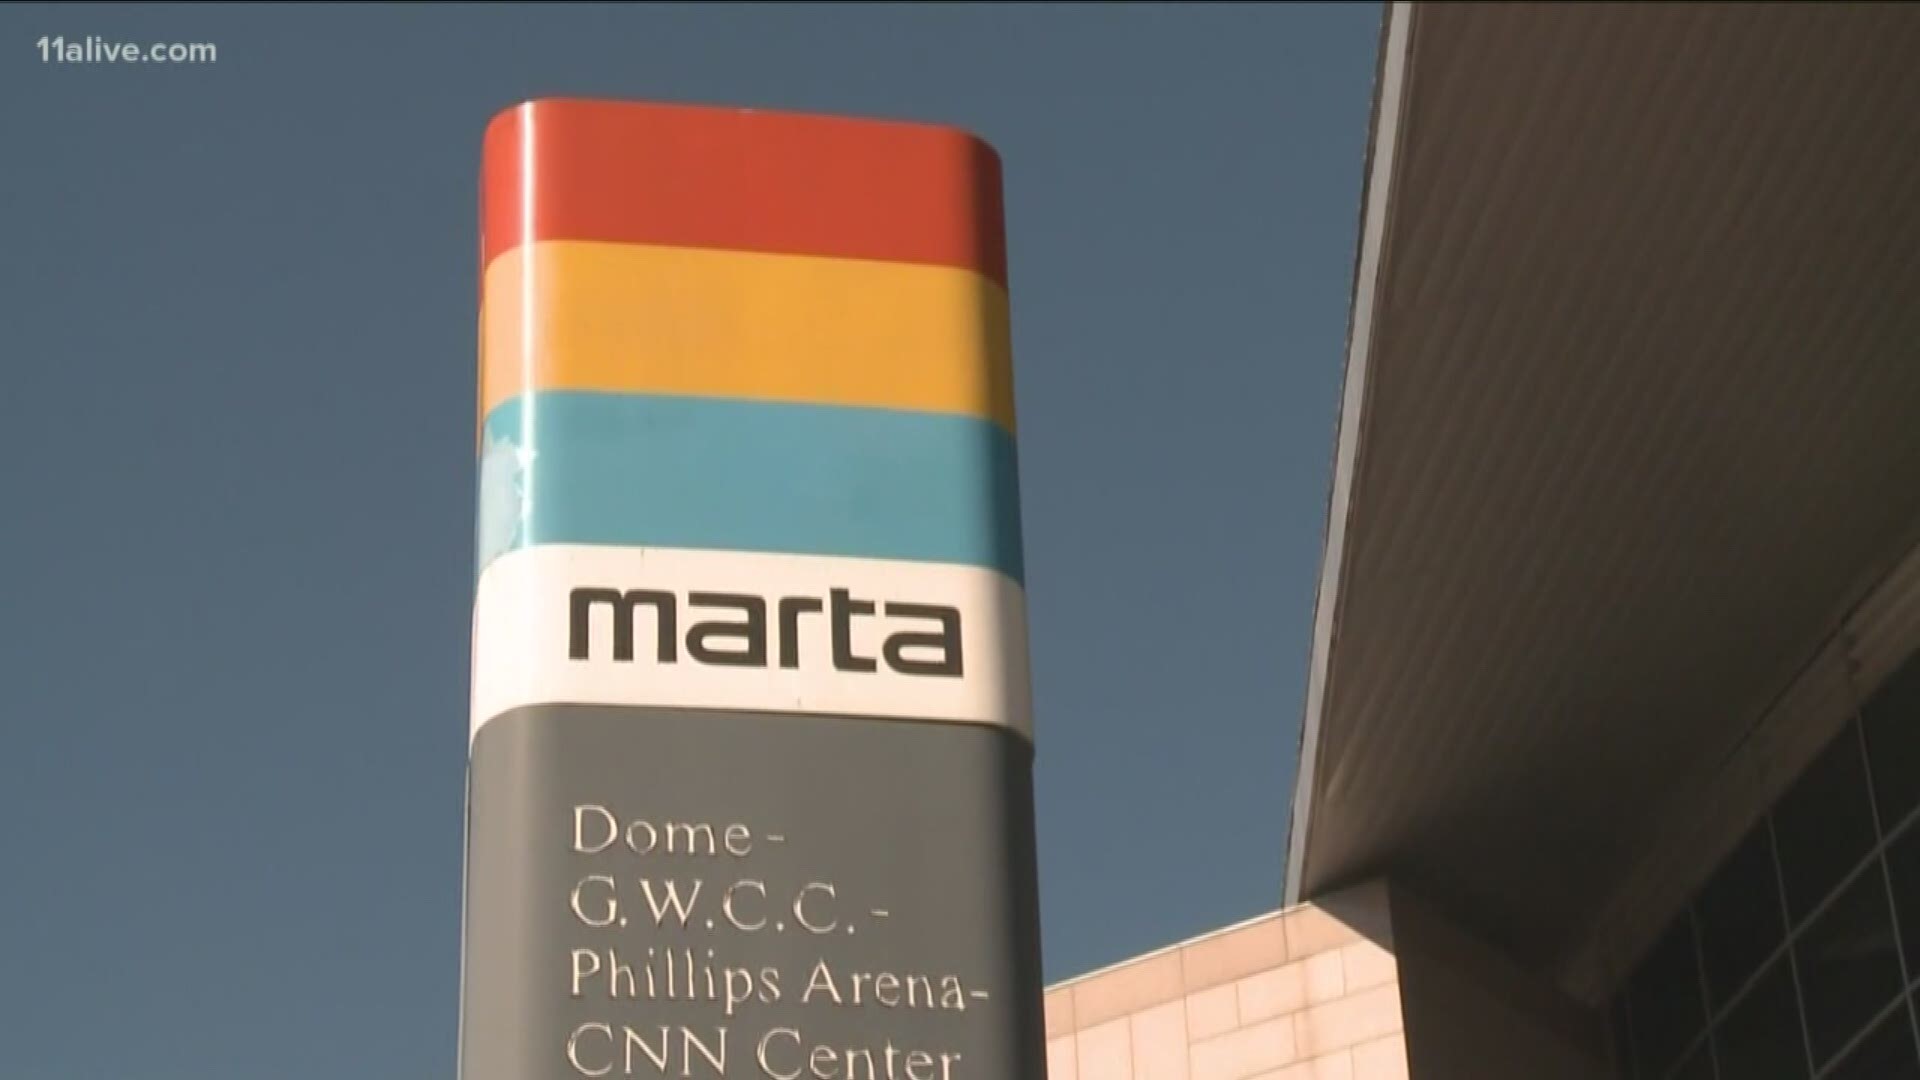 Beginning Monday, March 30, MARTA will roll out the reduced bus operations.